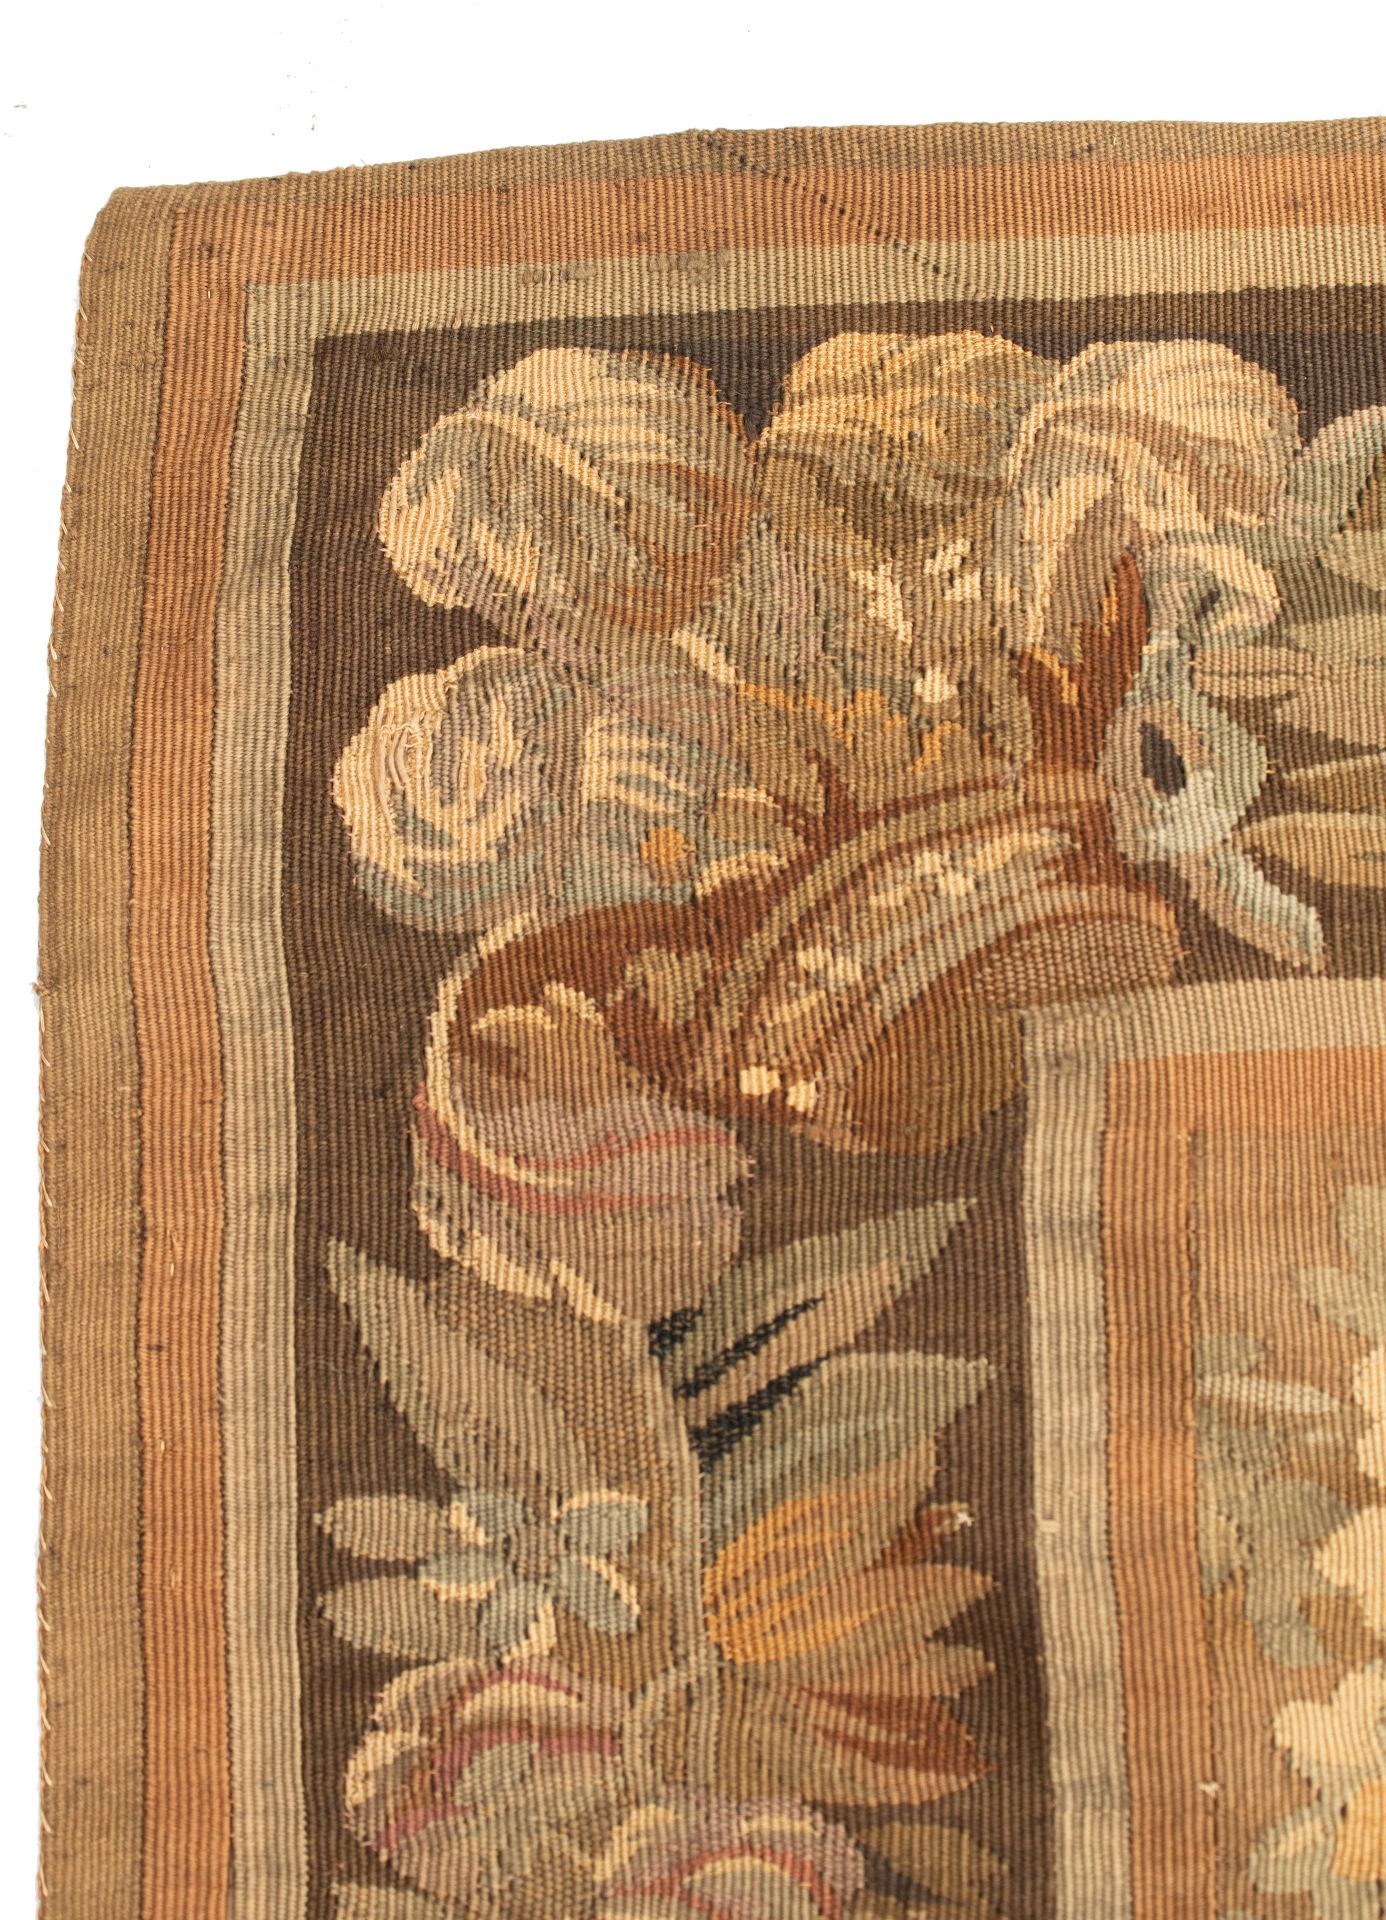 A 19thC wall tapestry depicting a heron and a duck in a landscape, 269 x 329 cm - Image 8 of 8